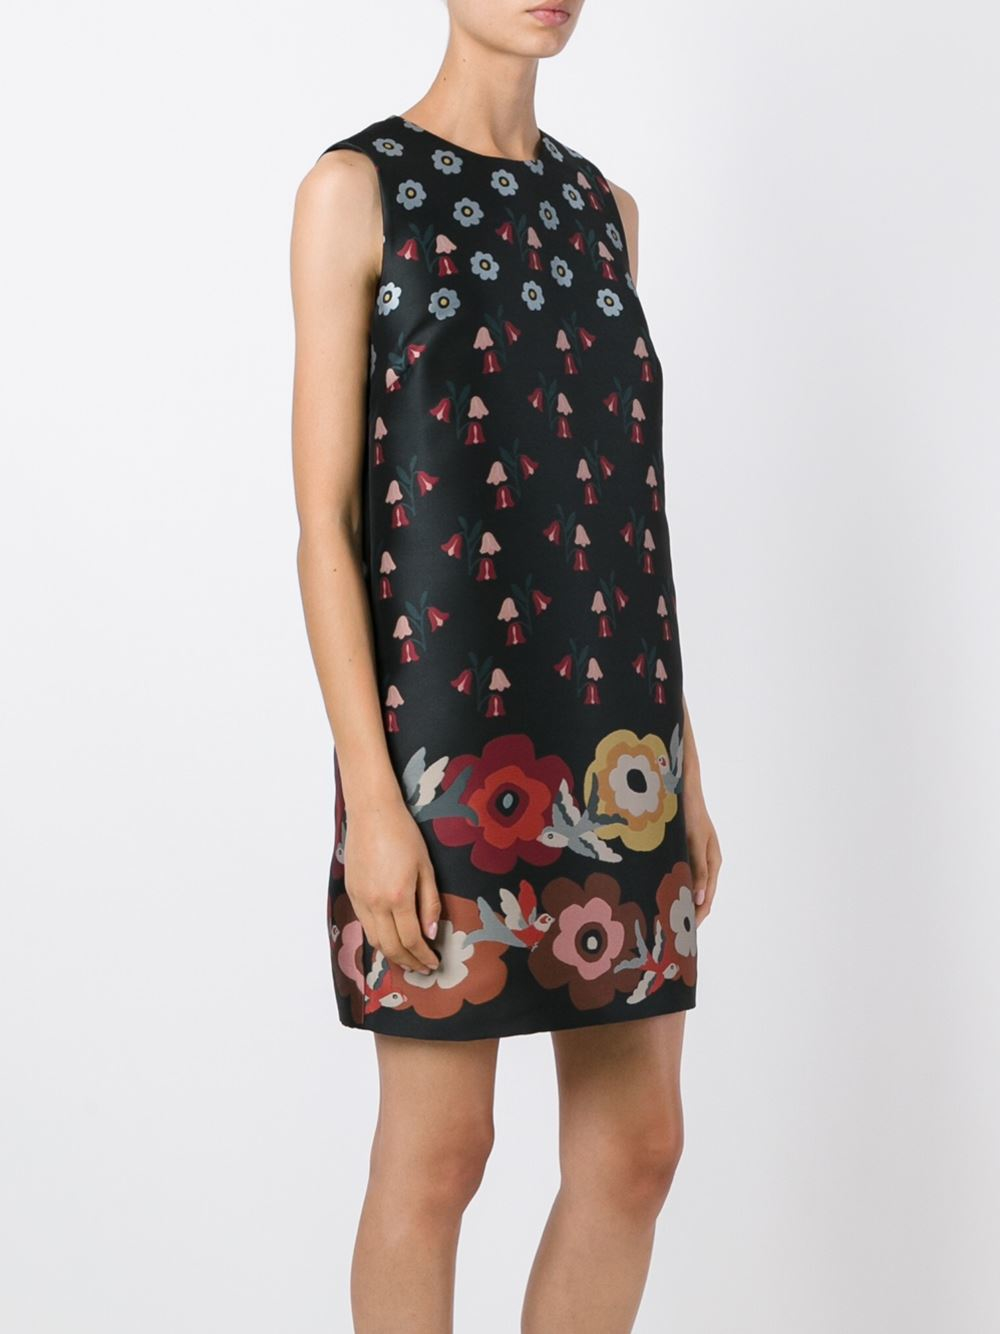 Lyst - Red valentino Floral-jacquard A-line Dress in Black